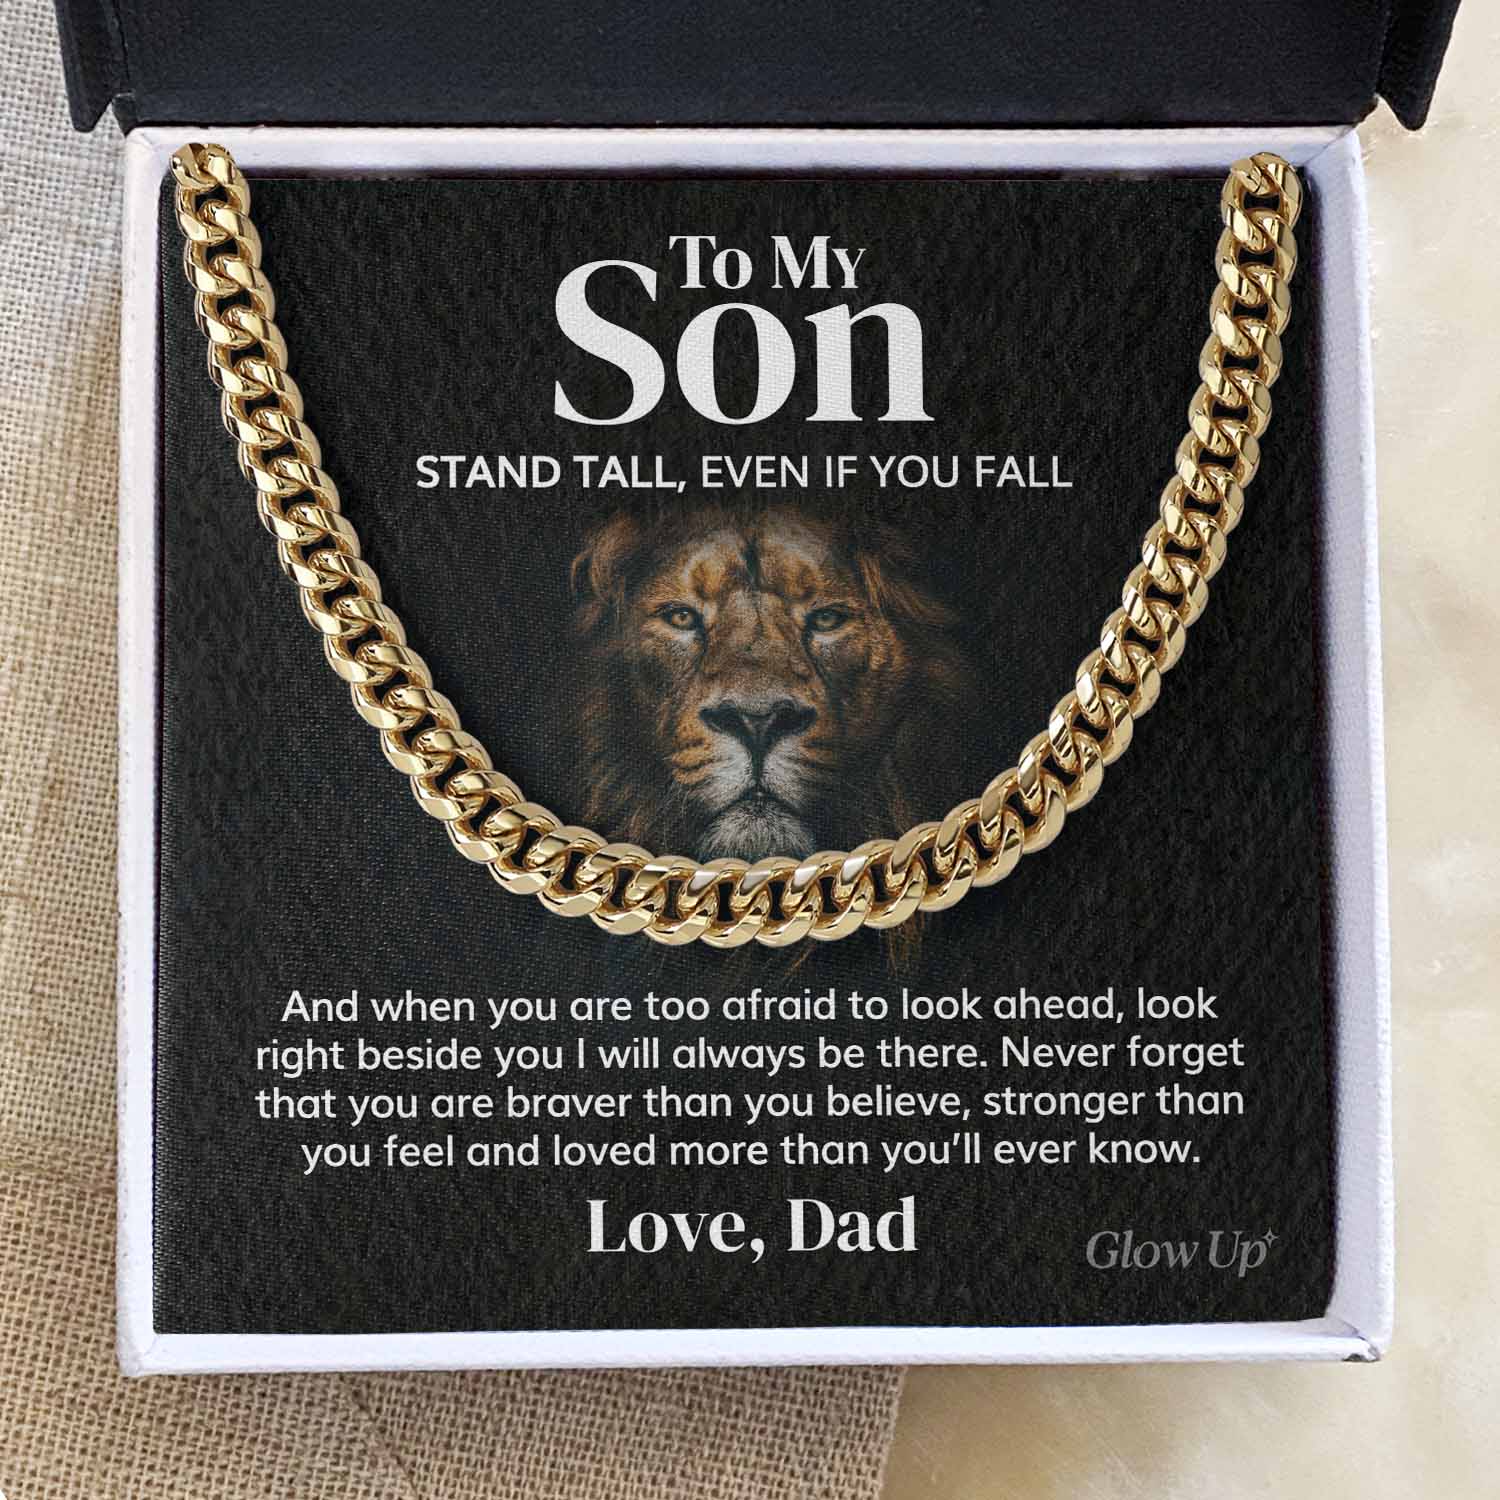 Glow Up Cuban Link Chain 18k Gold Over Stainless Steel / Two-Toned Box To my Son from Dad - 5mm Cuban Link Chain - Stand Tall